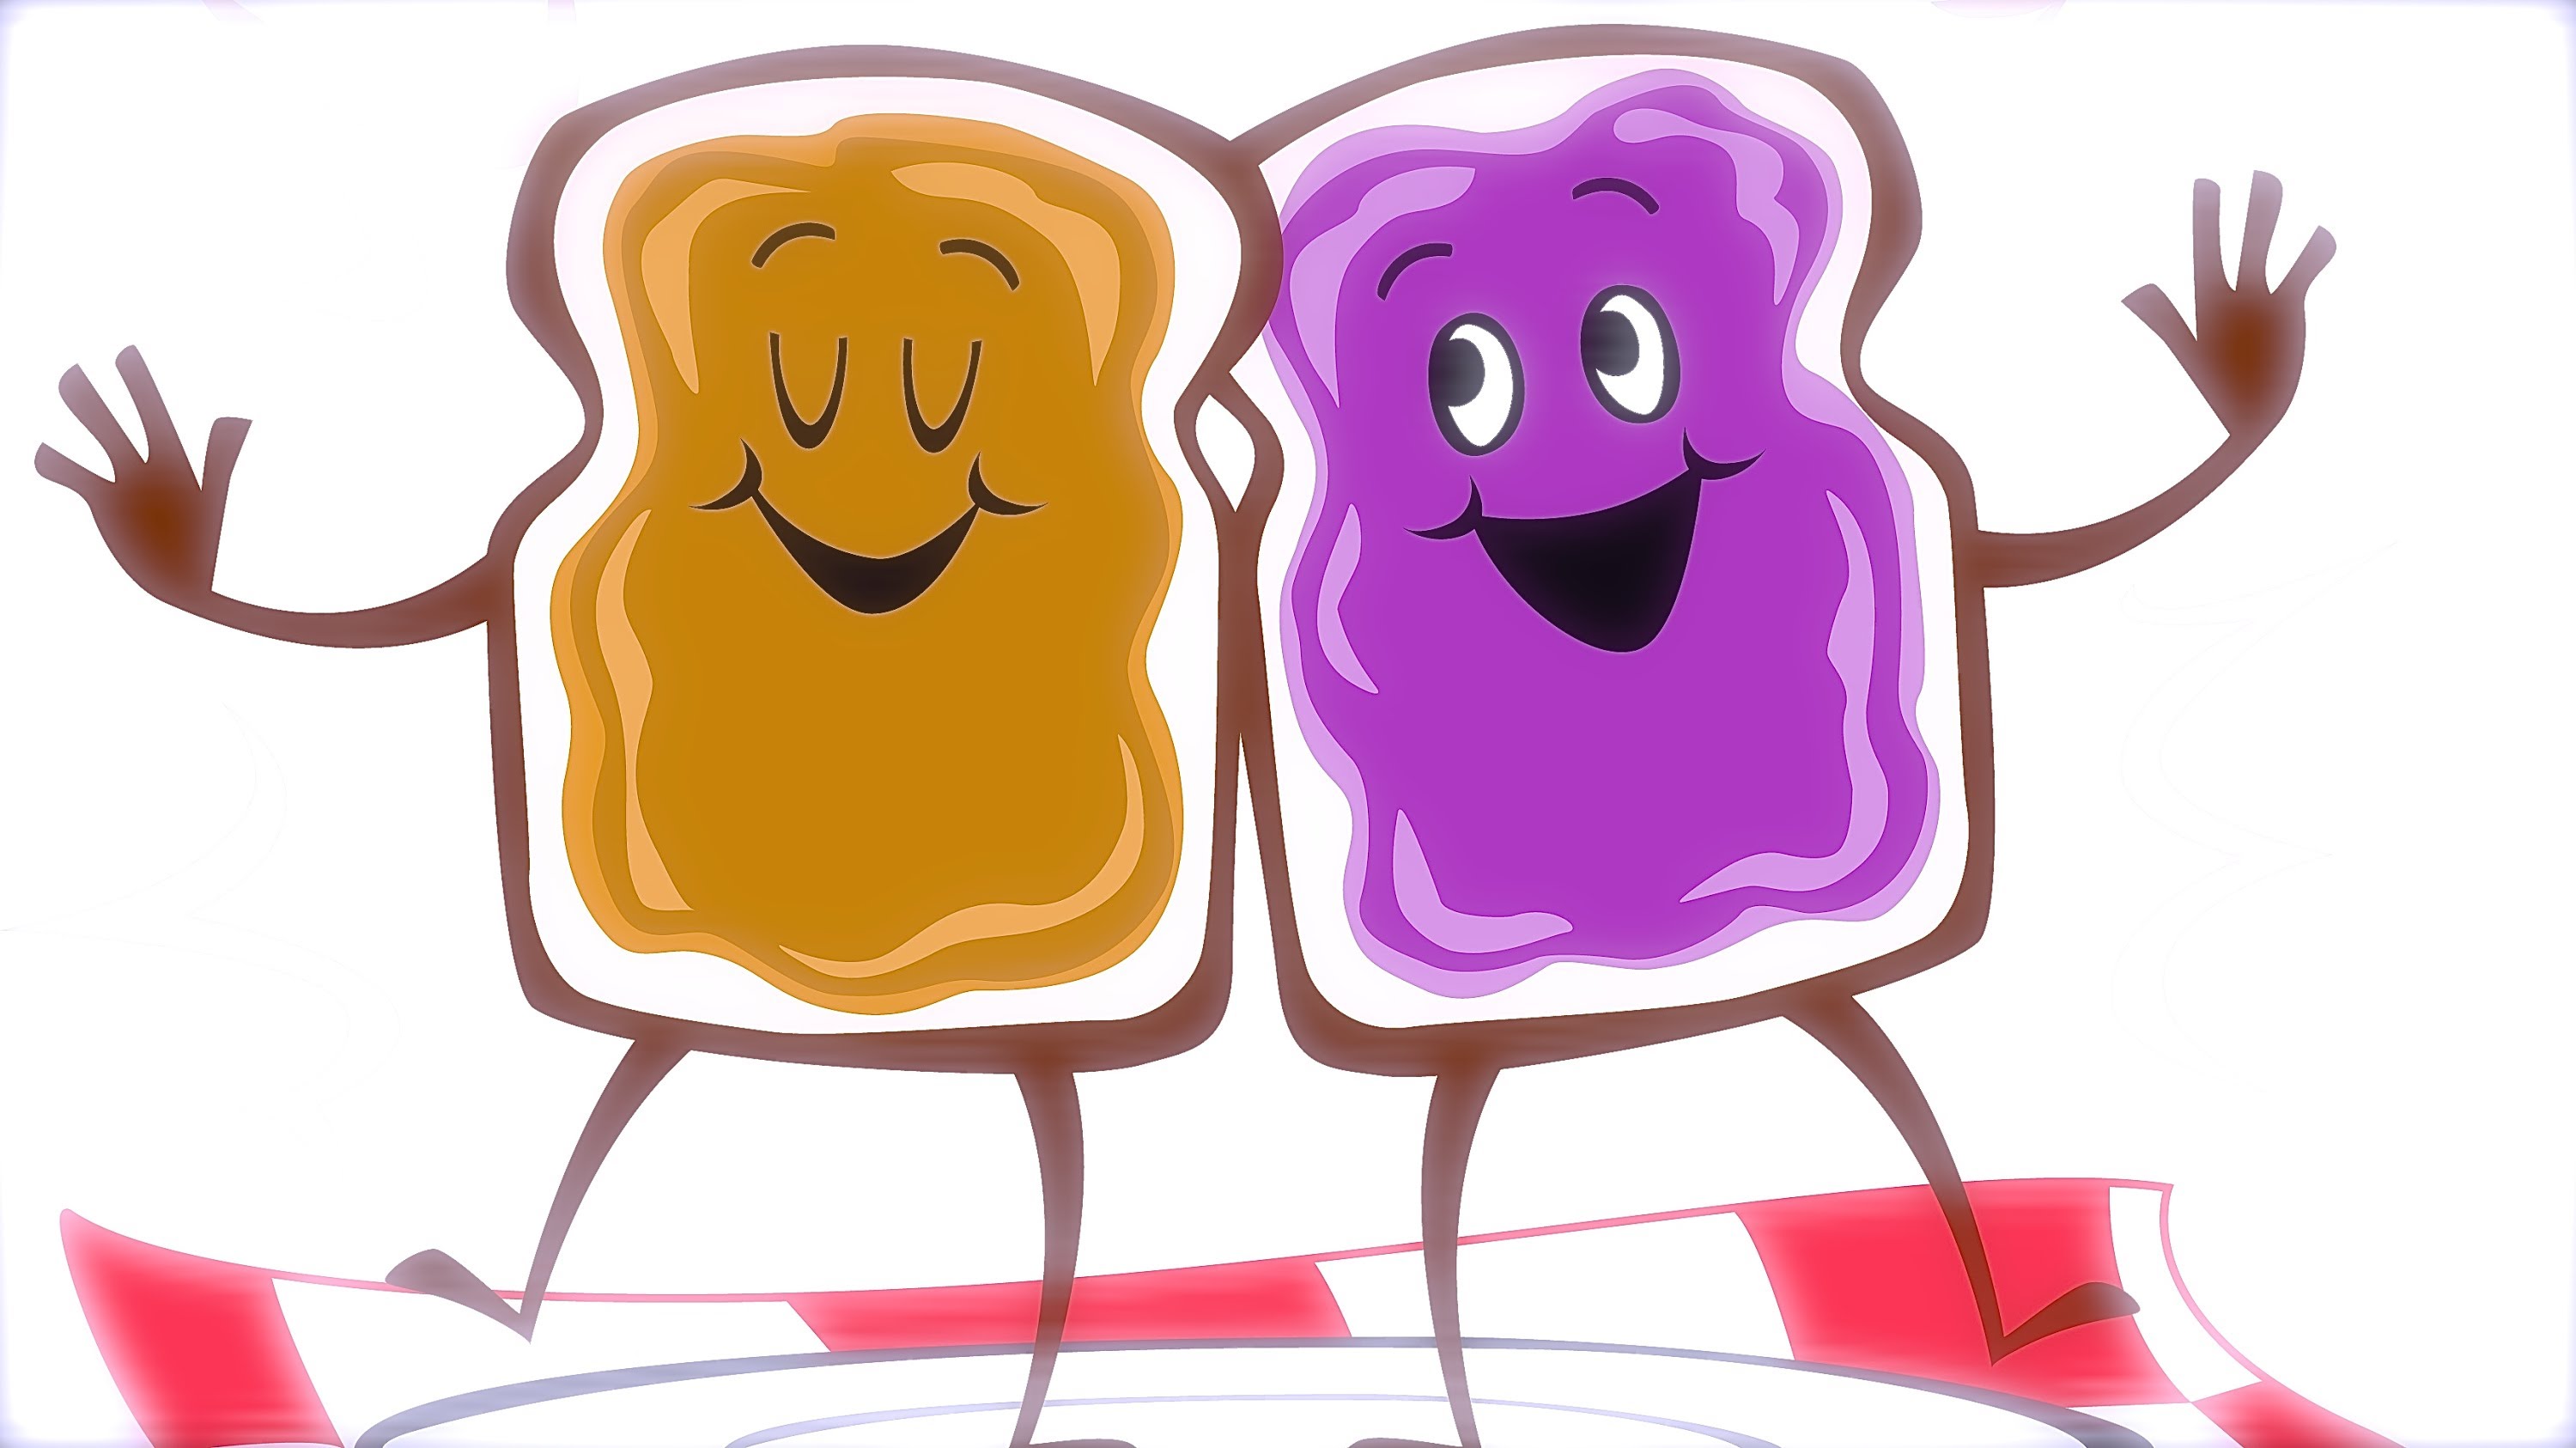 Peanut Butter and Jelly Sandw